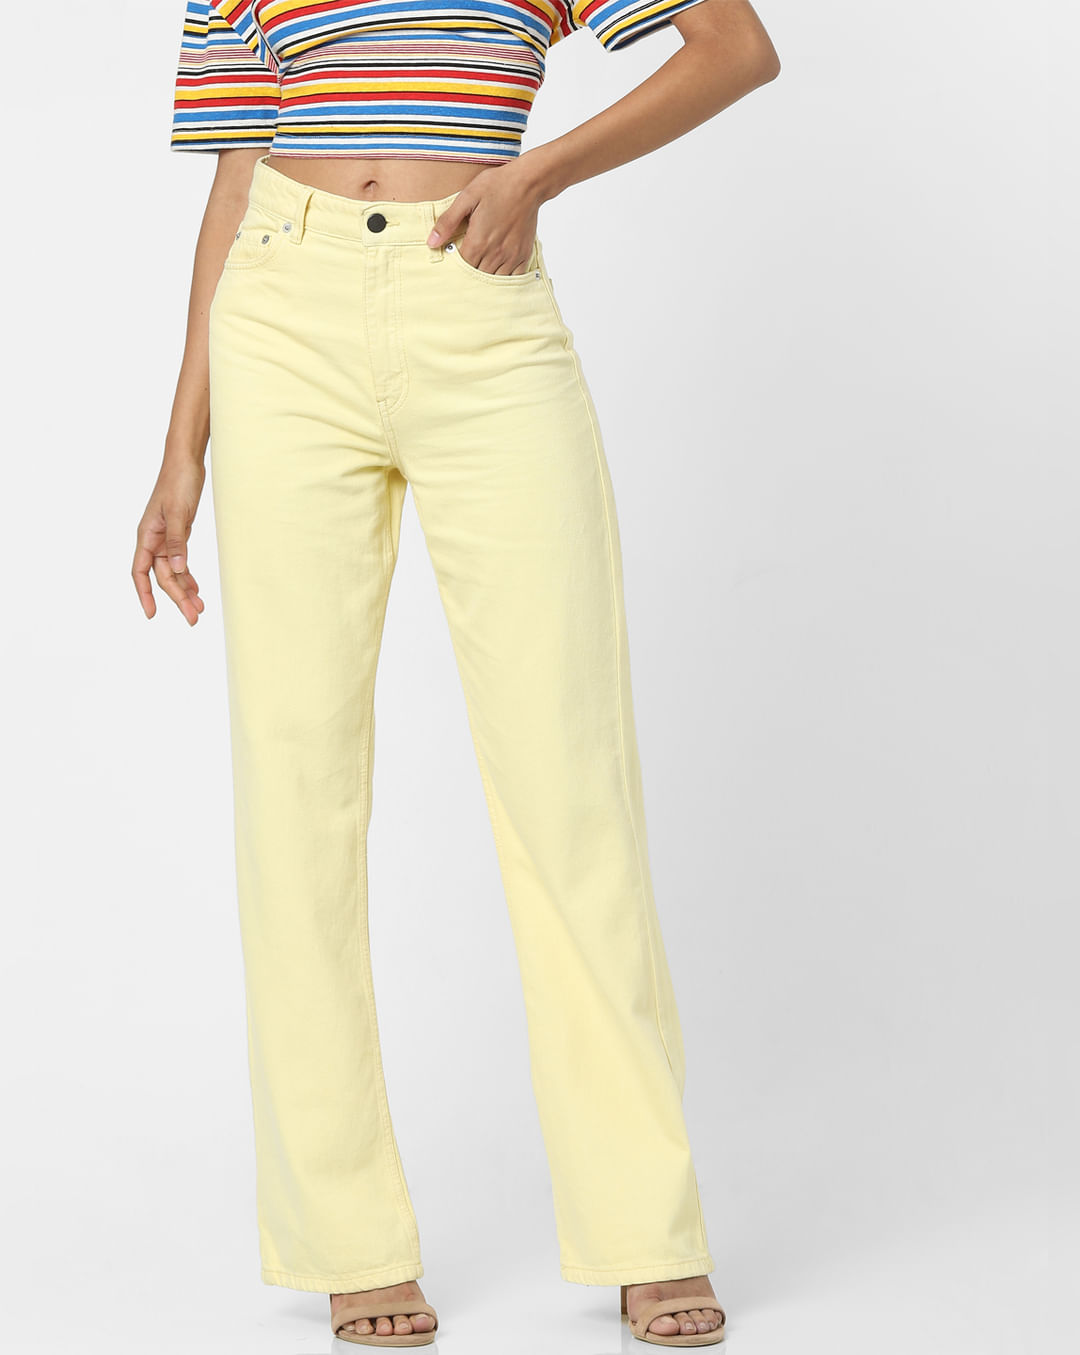 Buy Yellow High Waist Flared Jeans For Women Online - ONLY